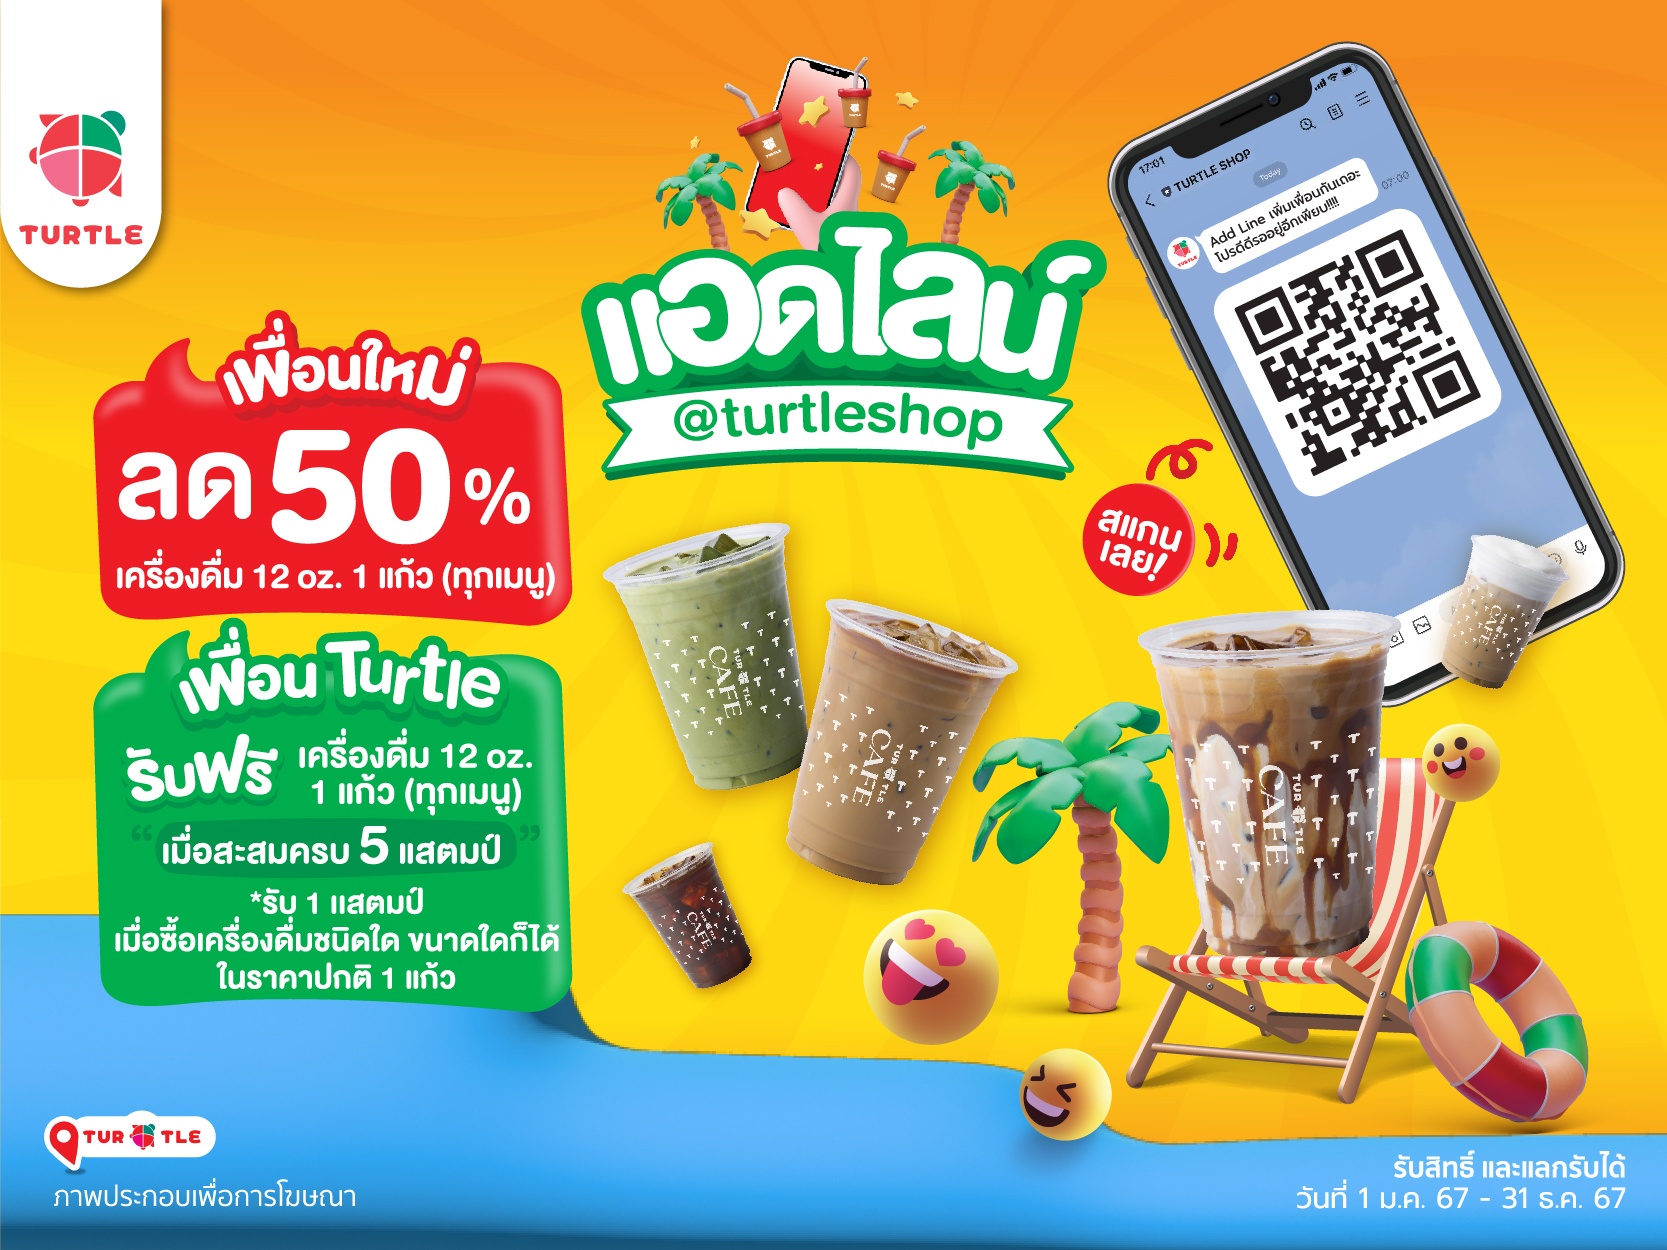 Get more special offers! Let’s join us on “Turtle Shop Line OA”